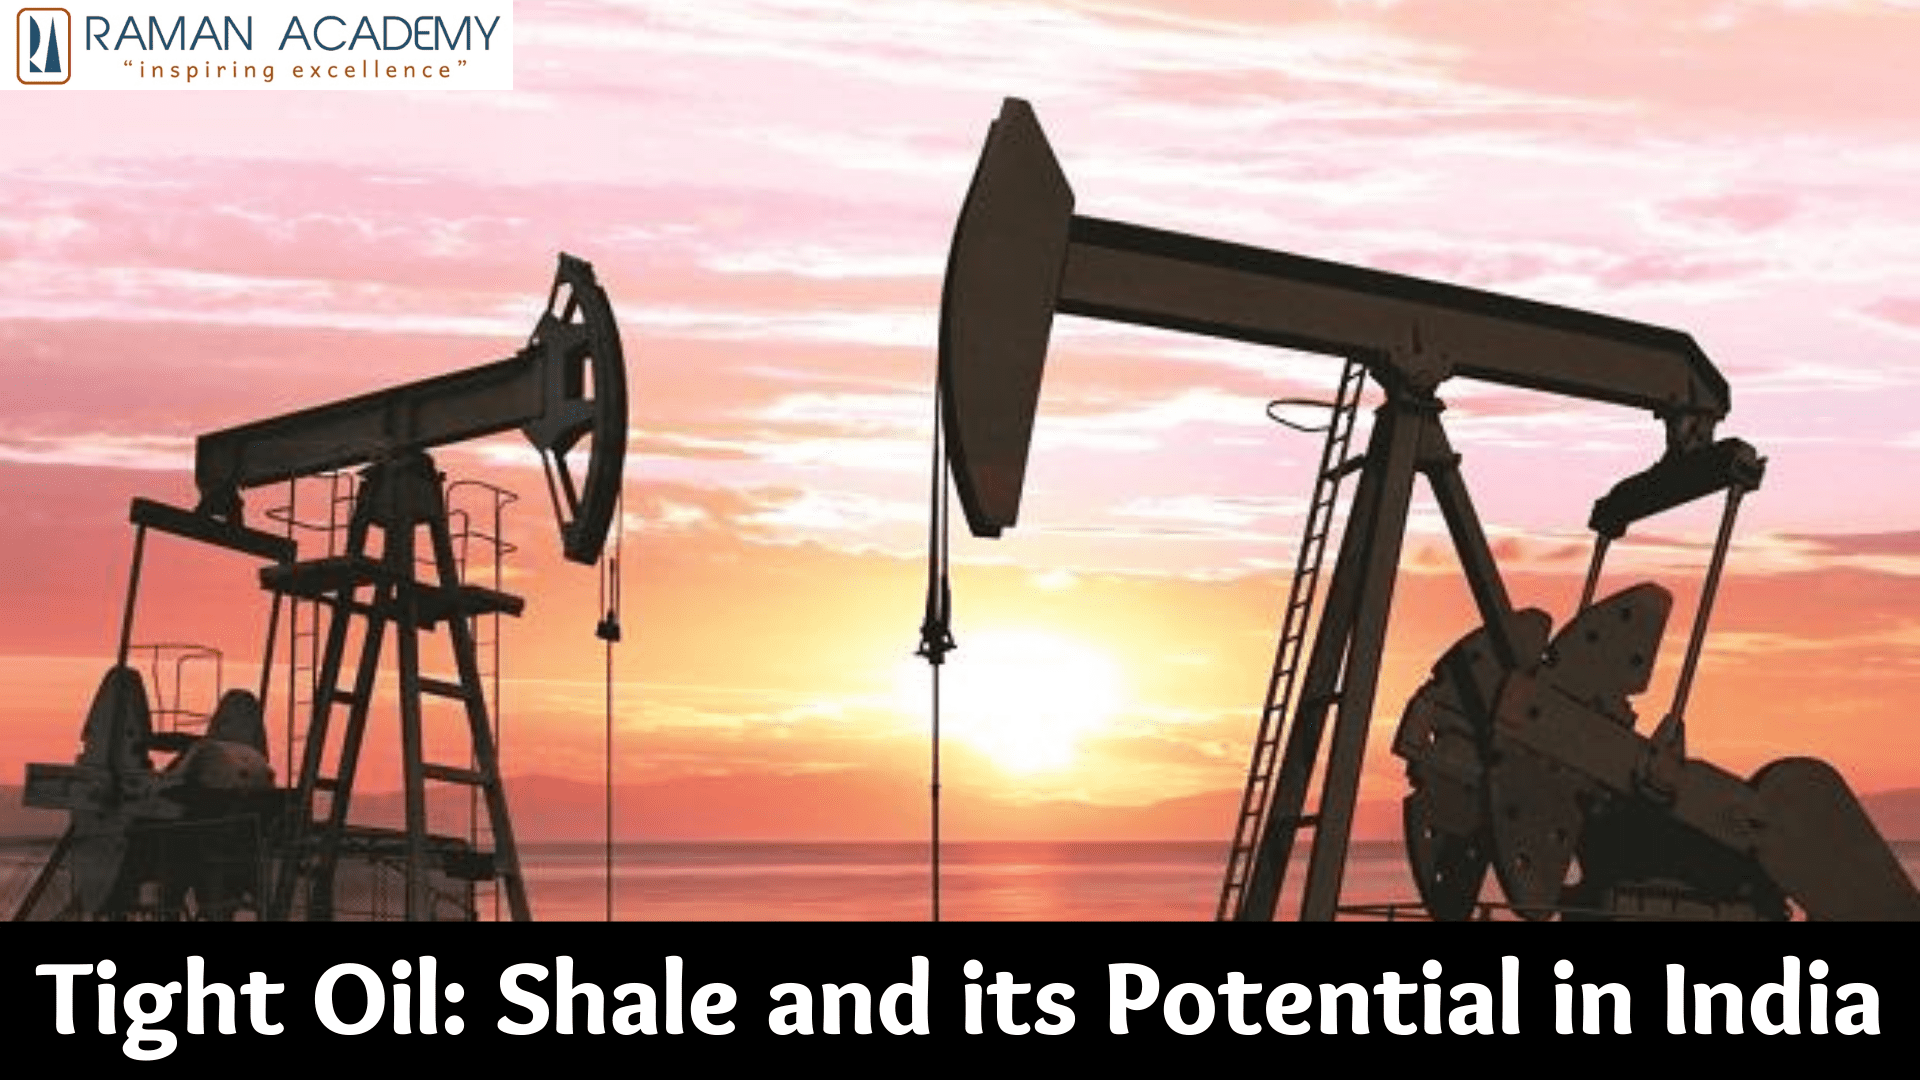 Tight Oil: Shale and its Potential in India